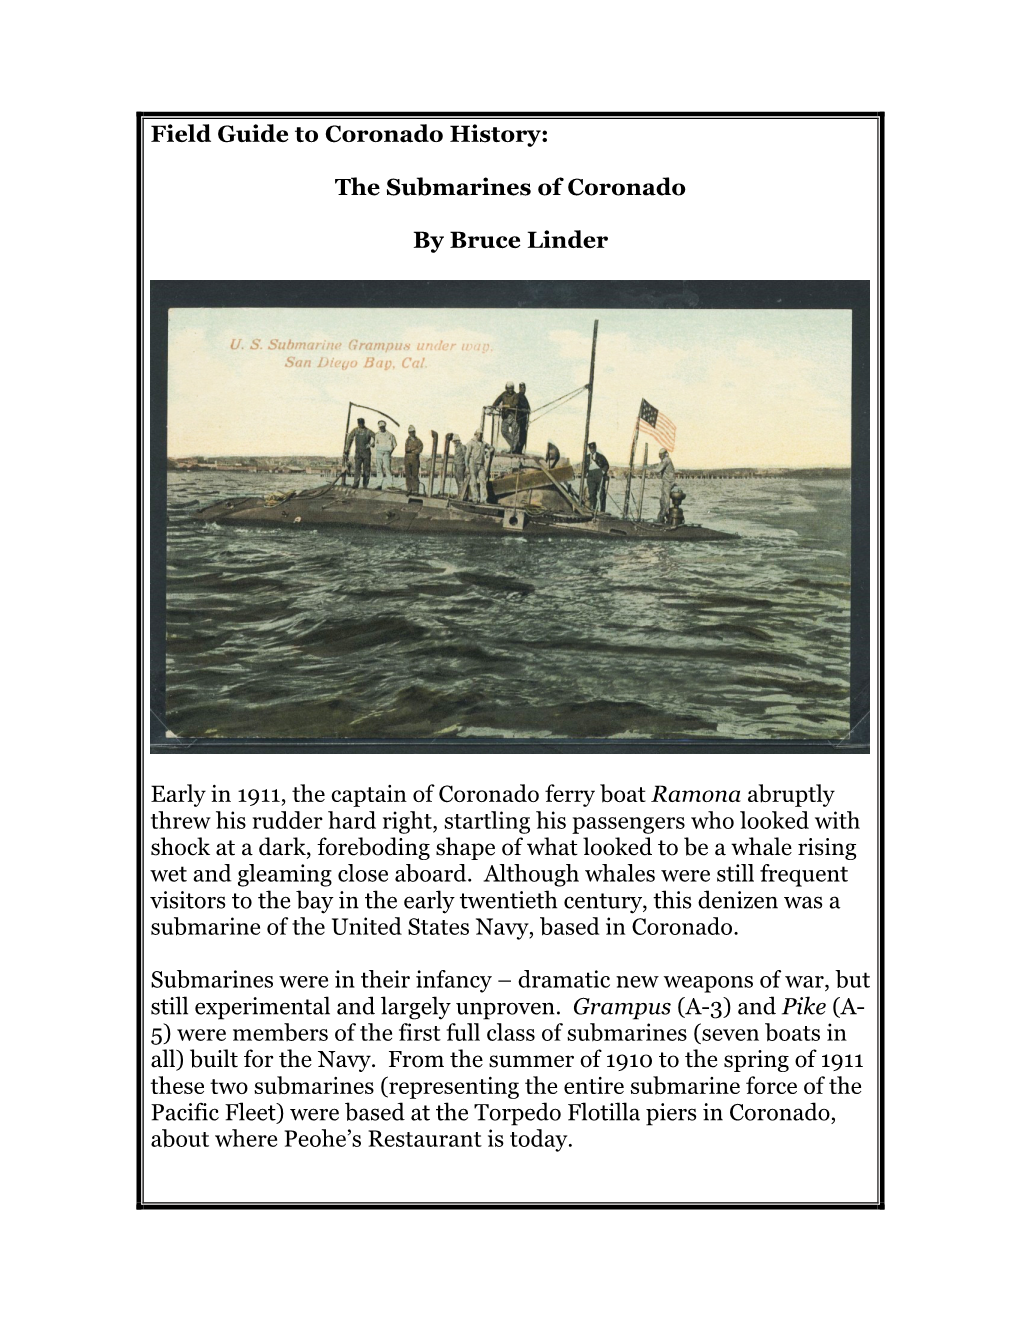 The Submarines of Coronado by Bruce Linder Early in 1911, The